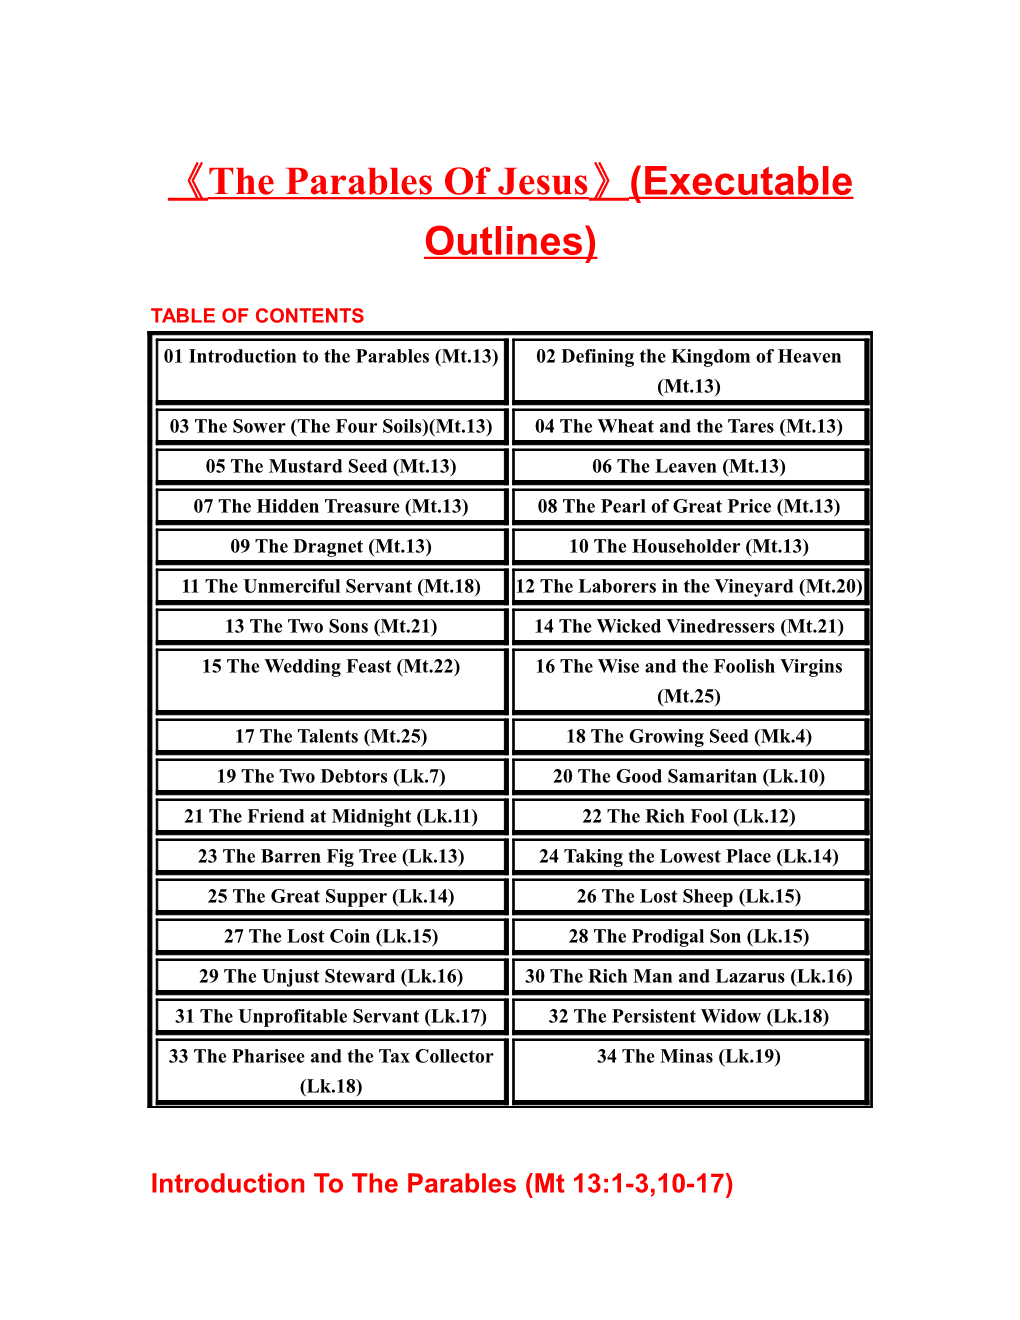 The Parables of Jesus (Executable Outlines)